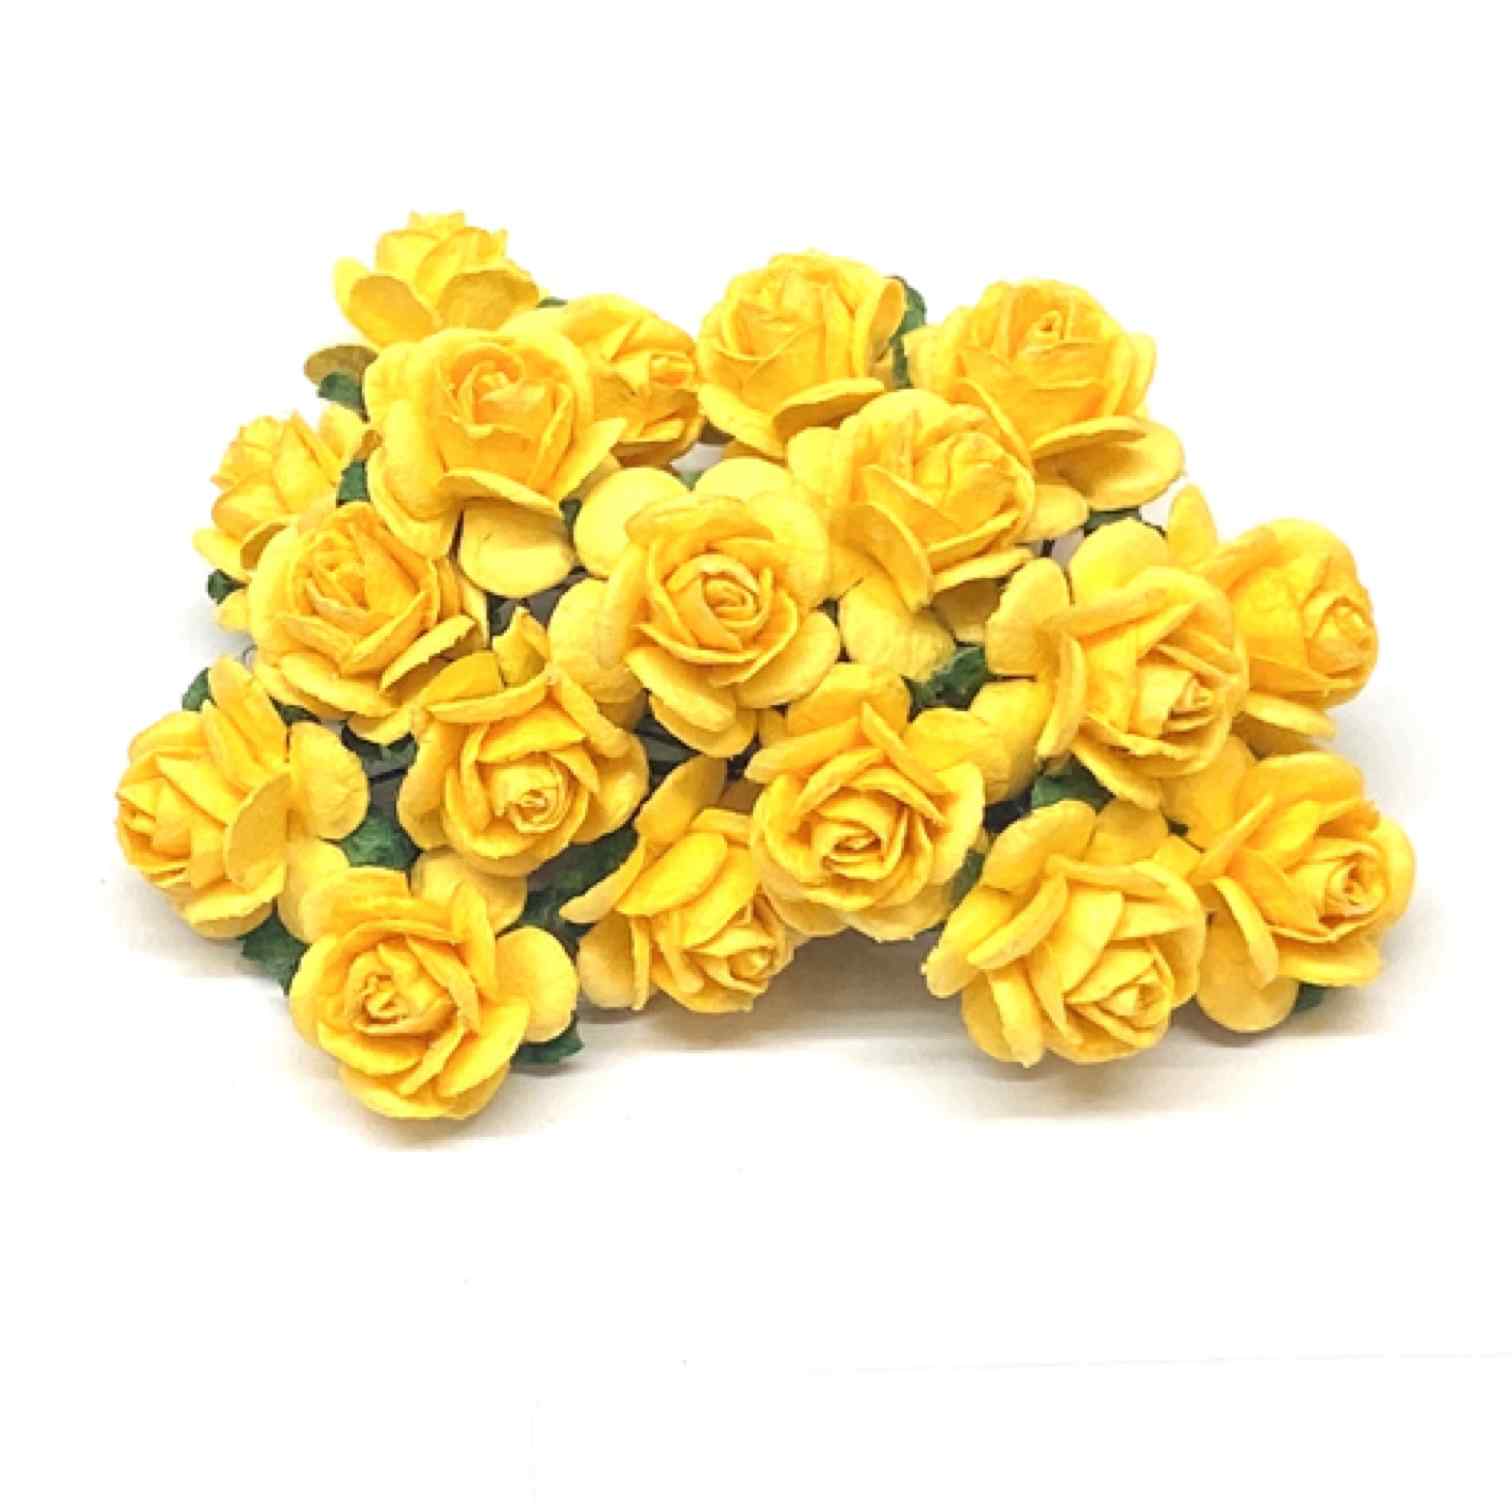 Golden yellow 20mm Open roses OR040